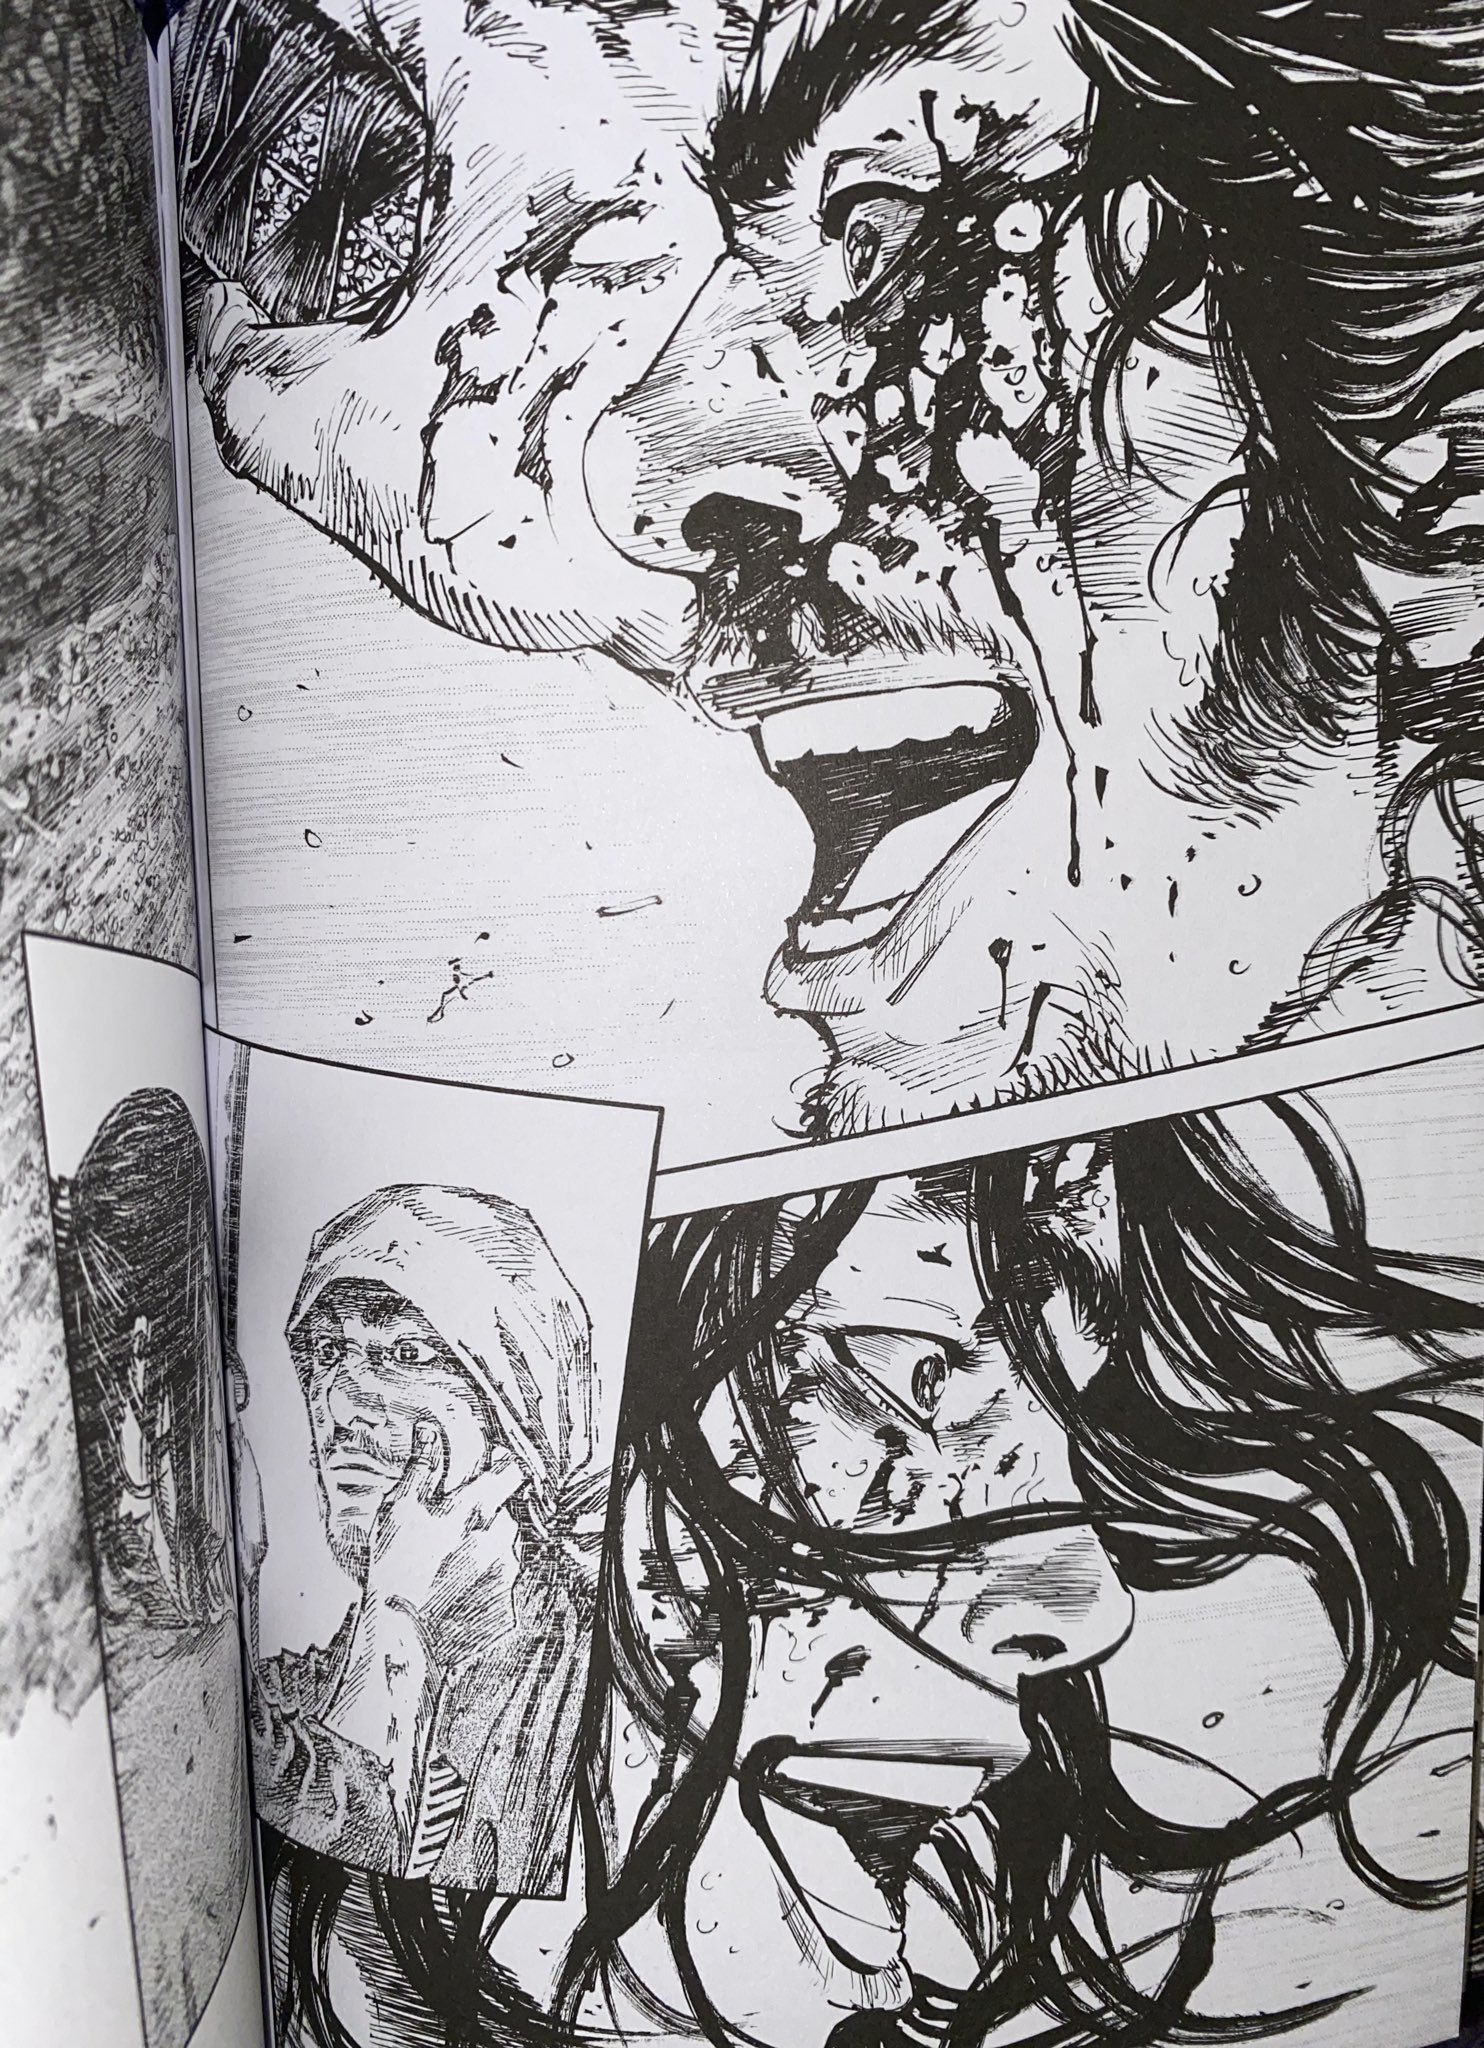 Bruce on Twitter: "I remember thinking this was vs Kojiro before I read Vagabond 🙃 https://t.co/IYOtTfwJIh" / Twitter